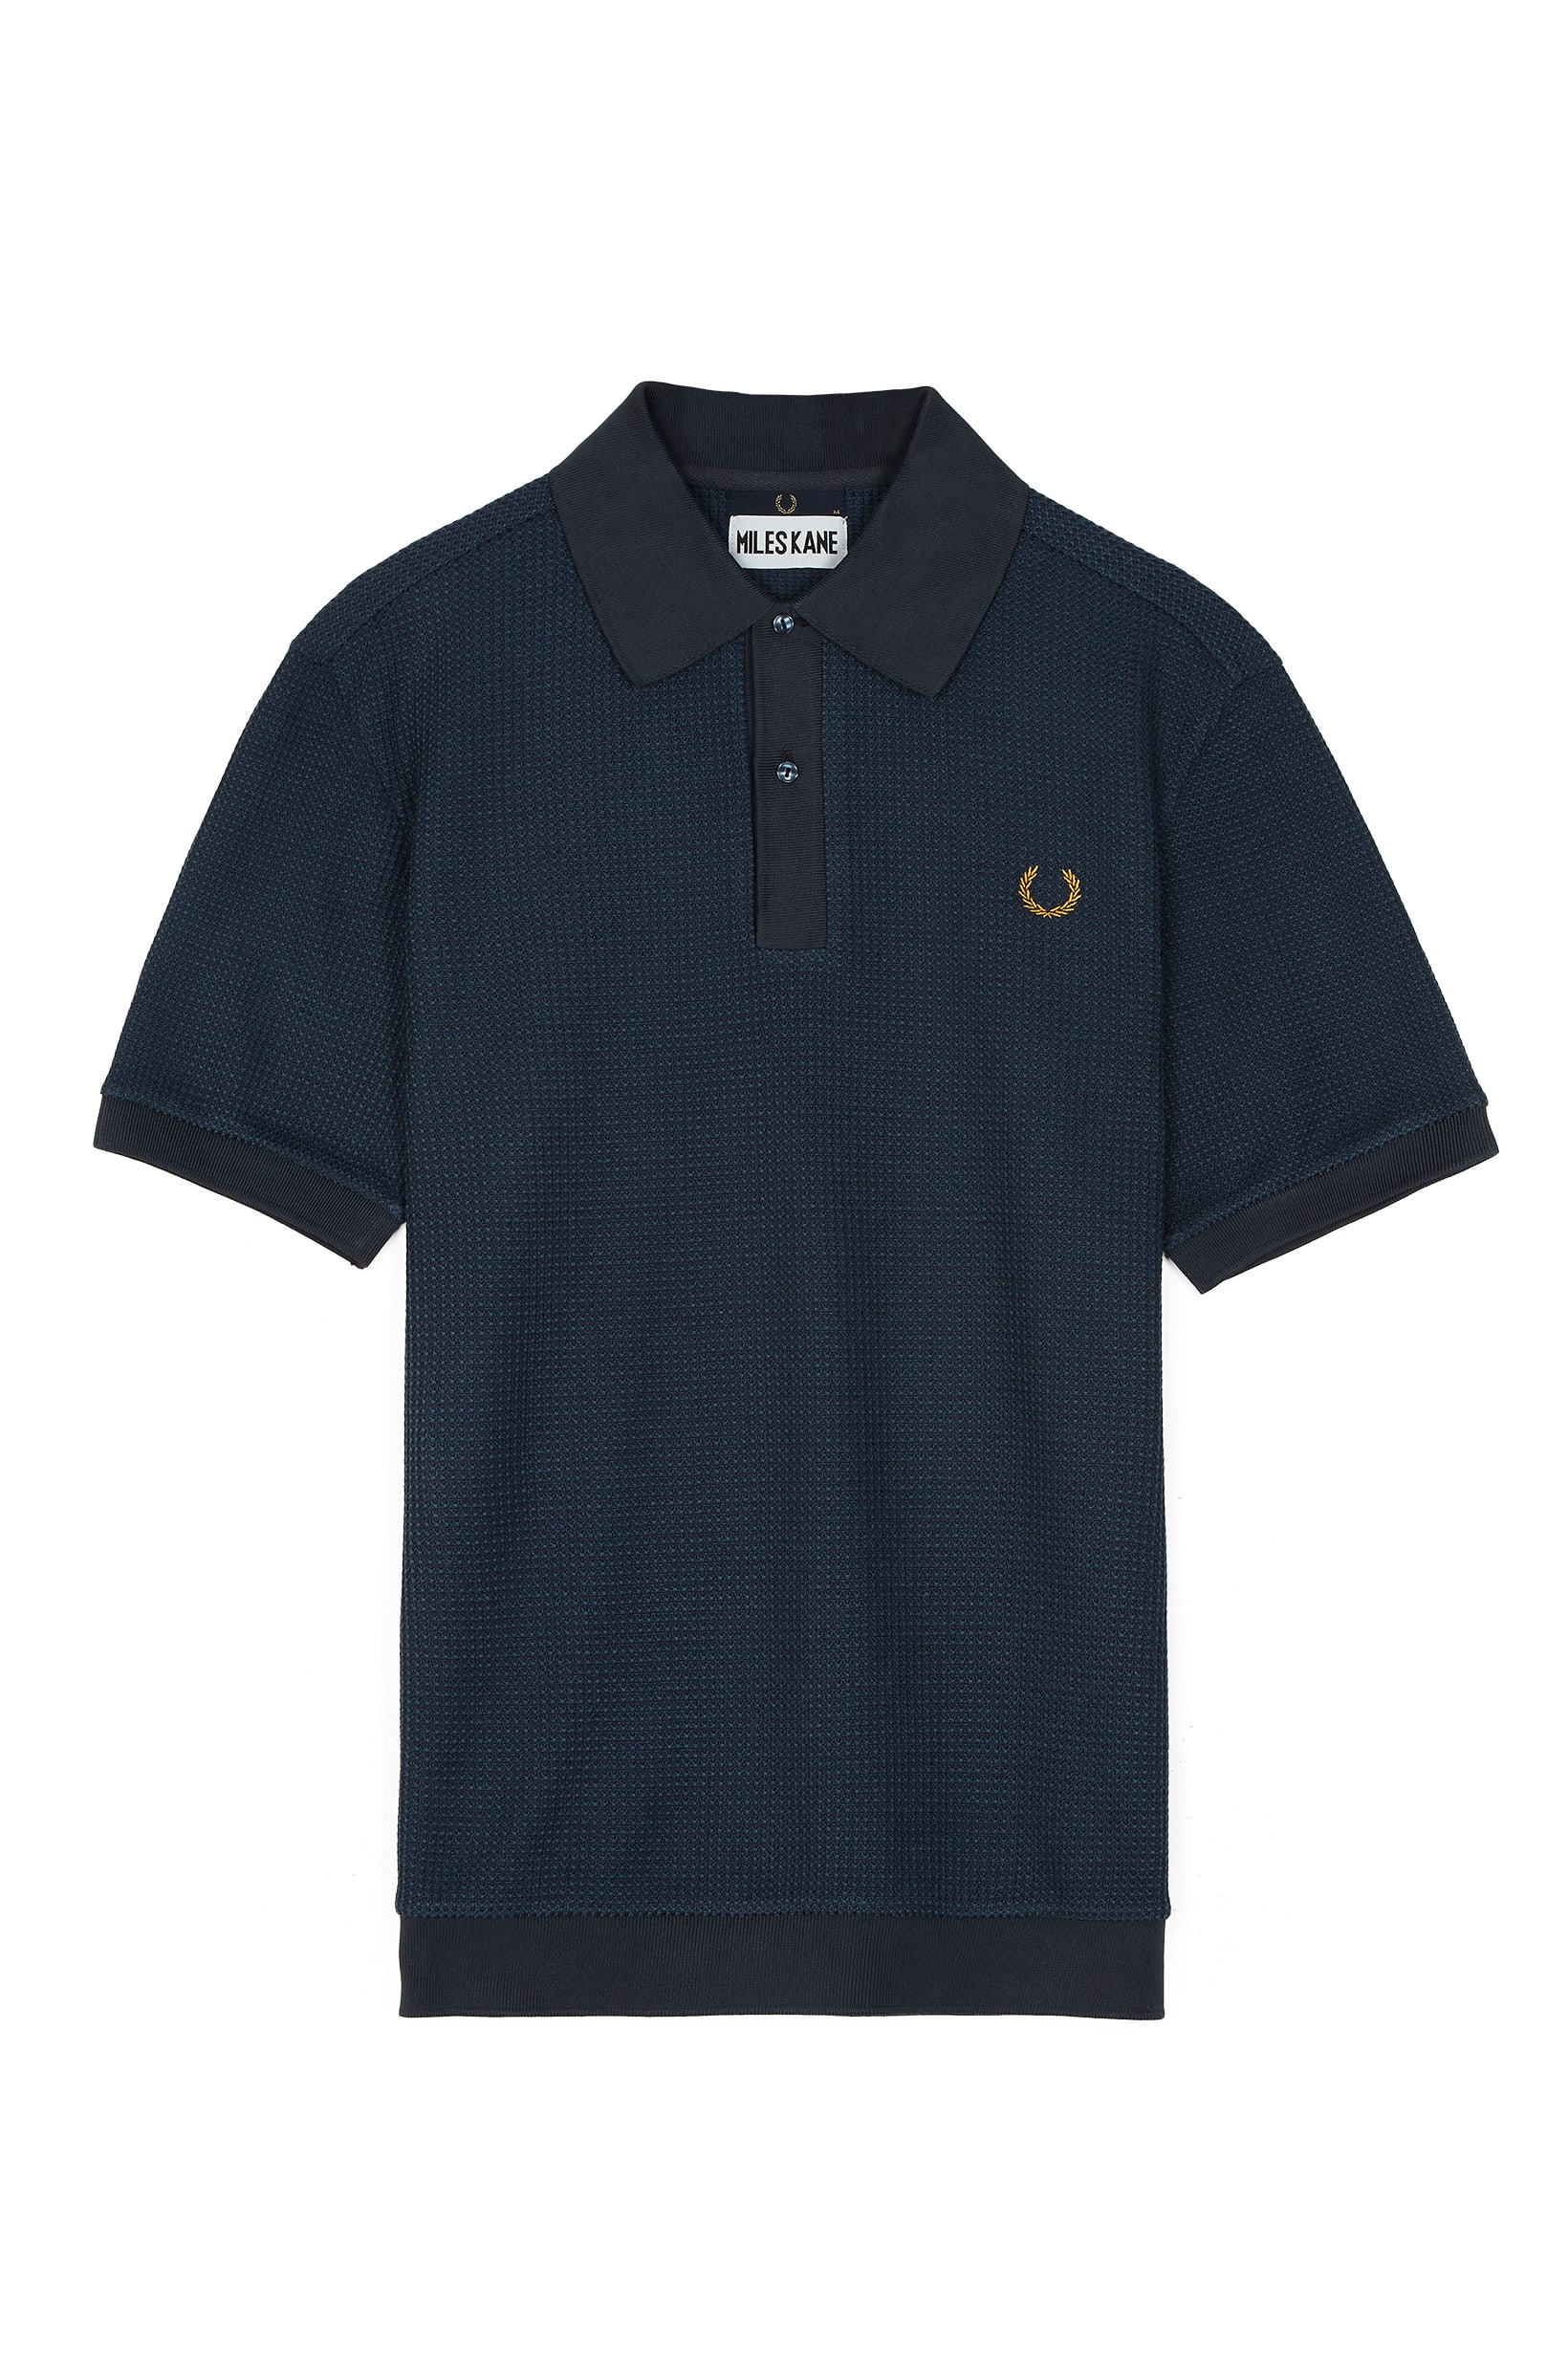 fredperrymiles12